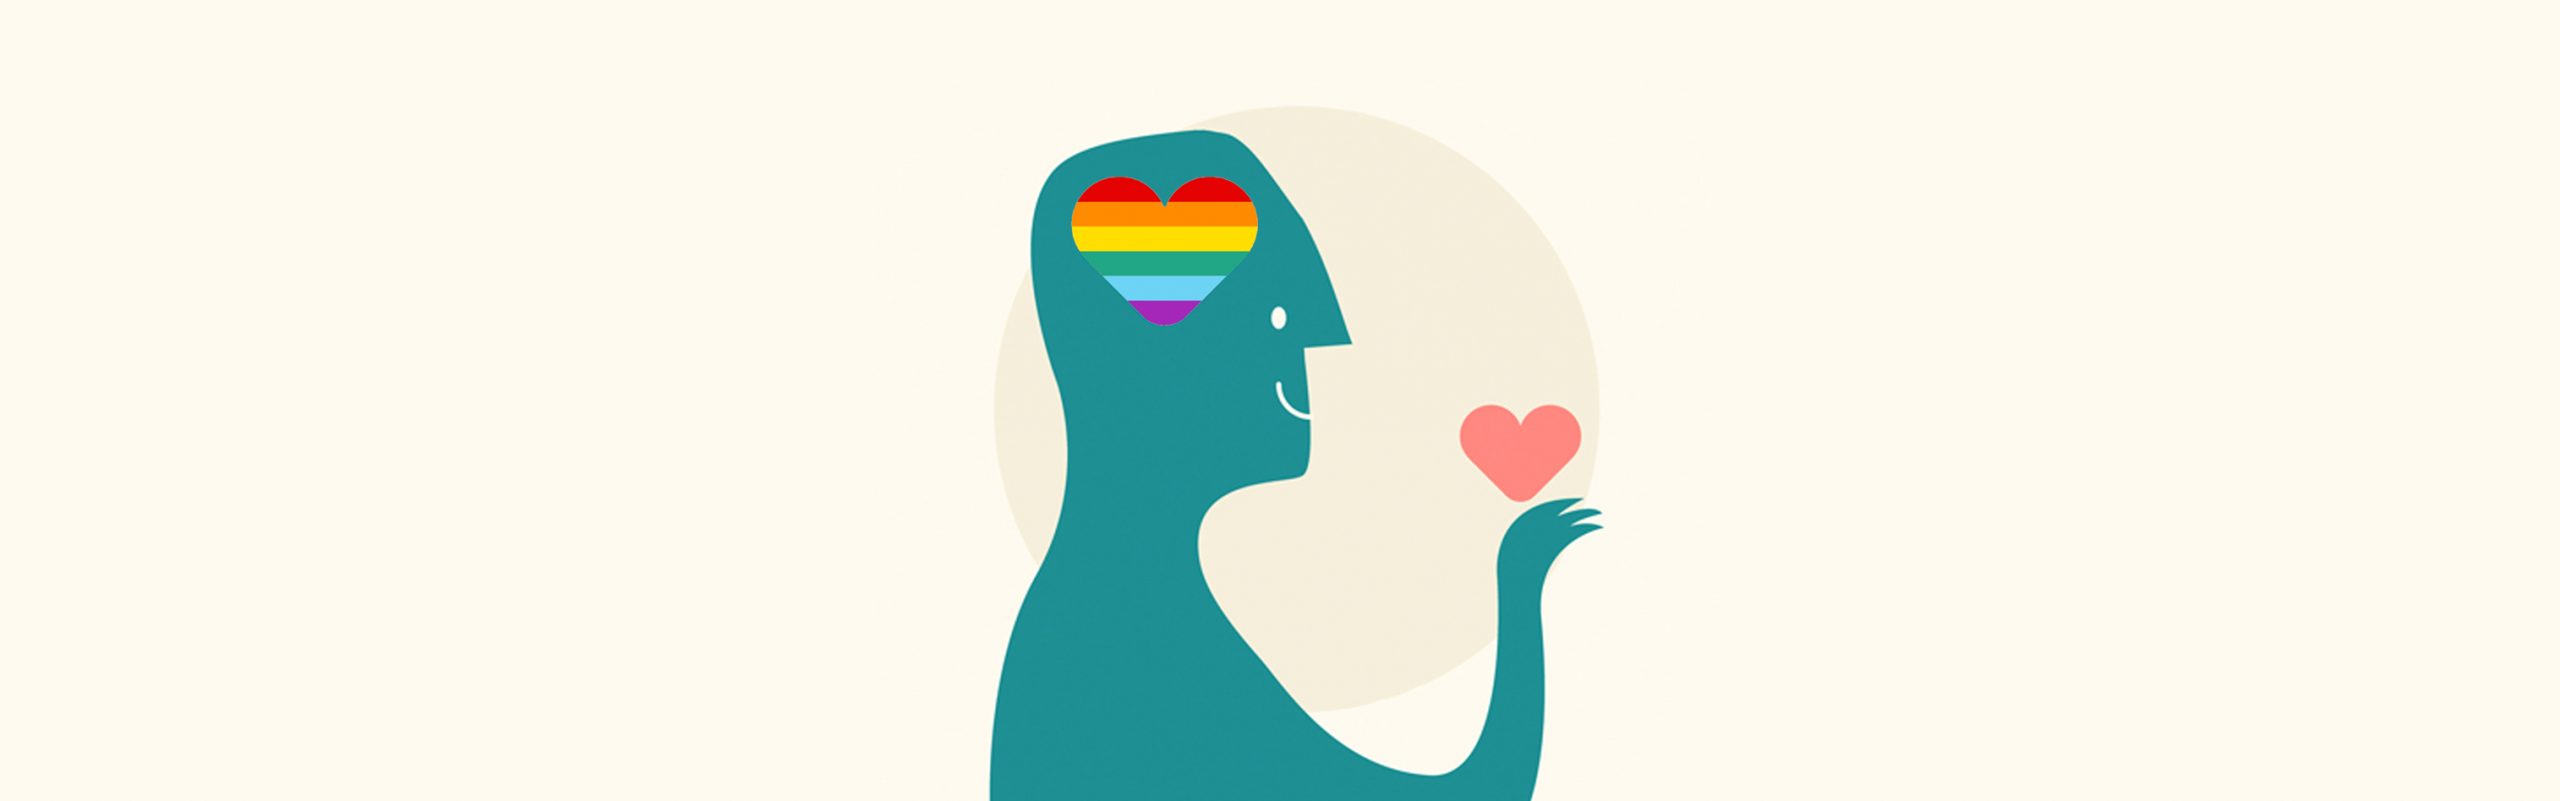 LGBT inclusive mental health services: a teal human silhouette with a heart shaped brain in rainbow colours.